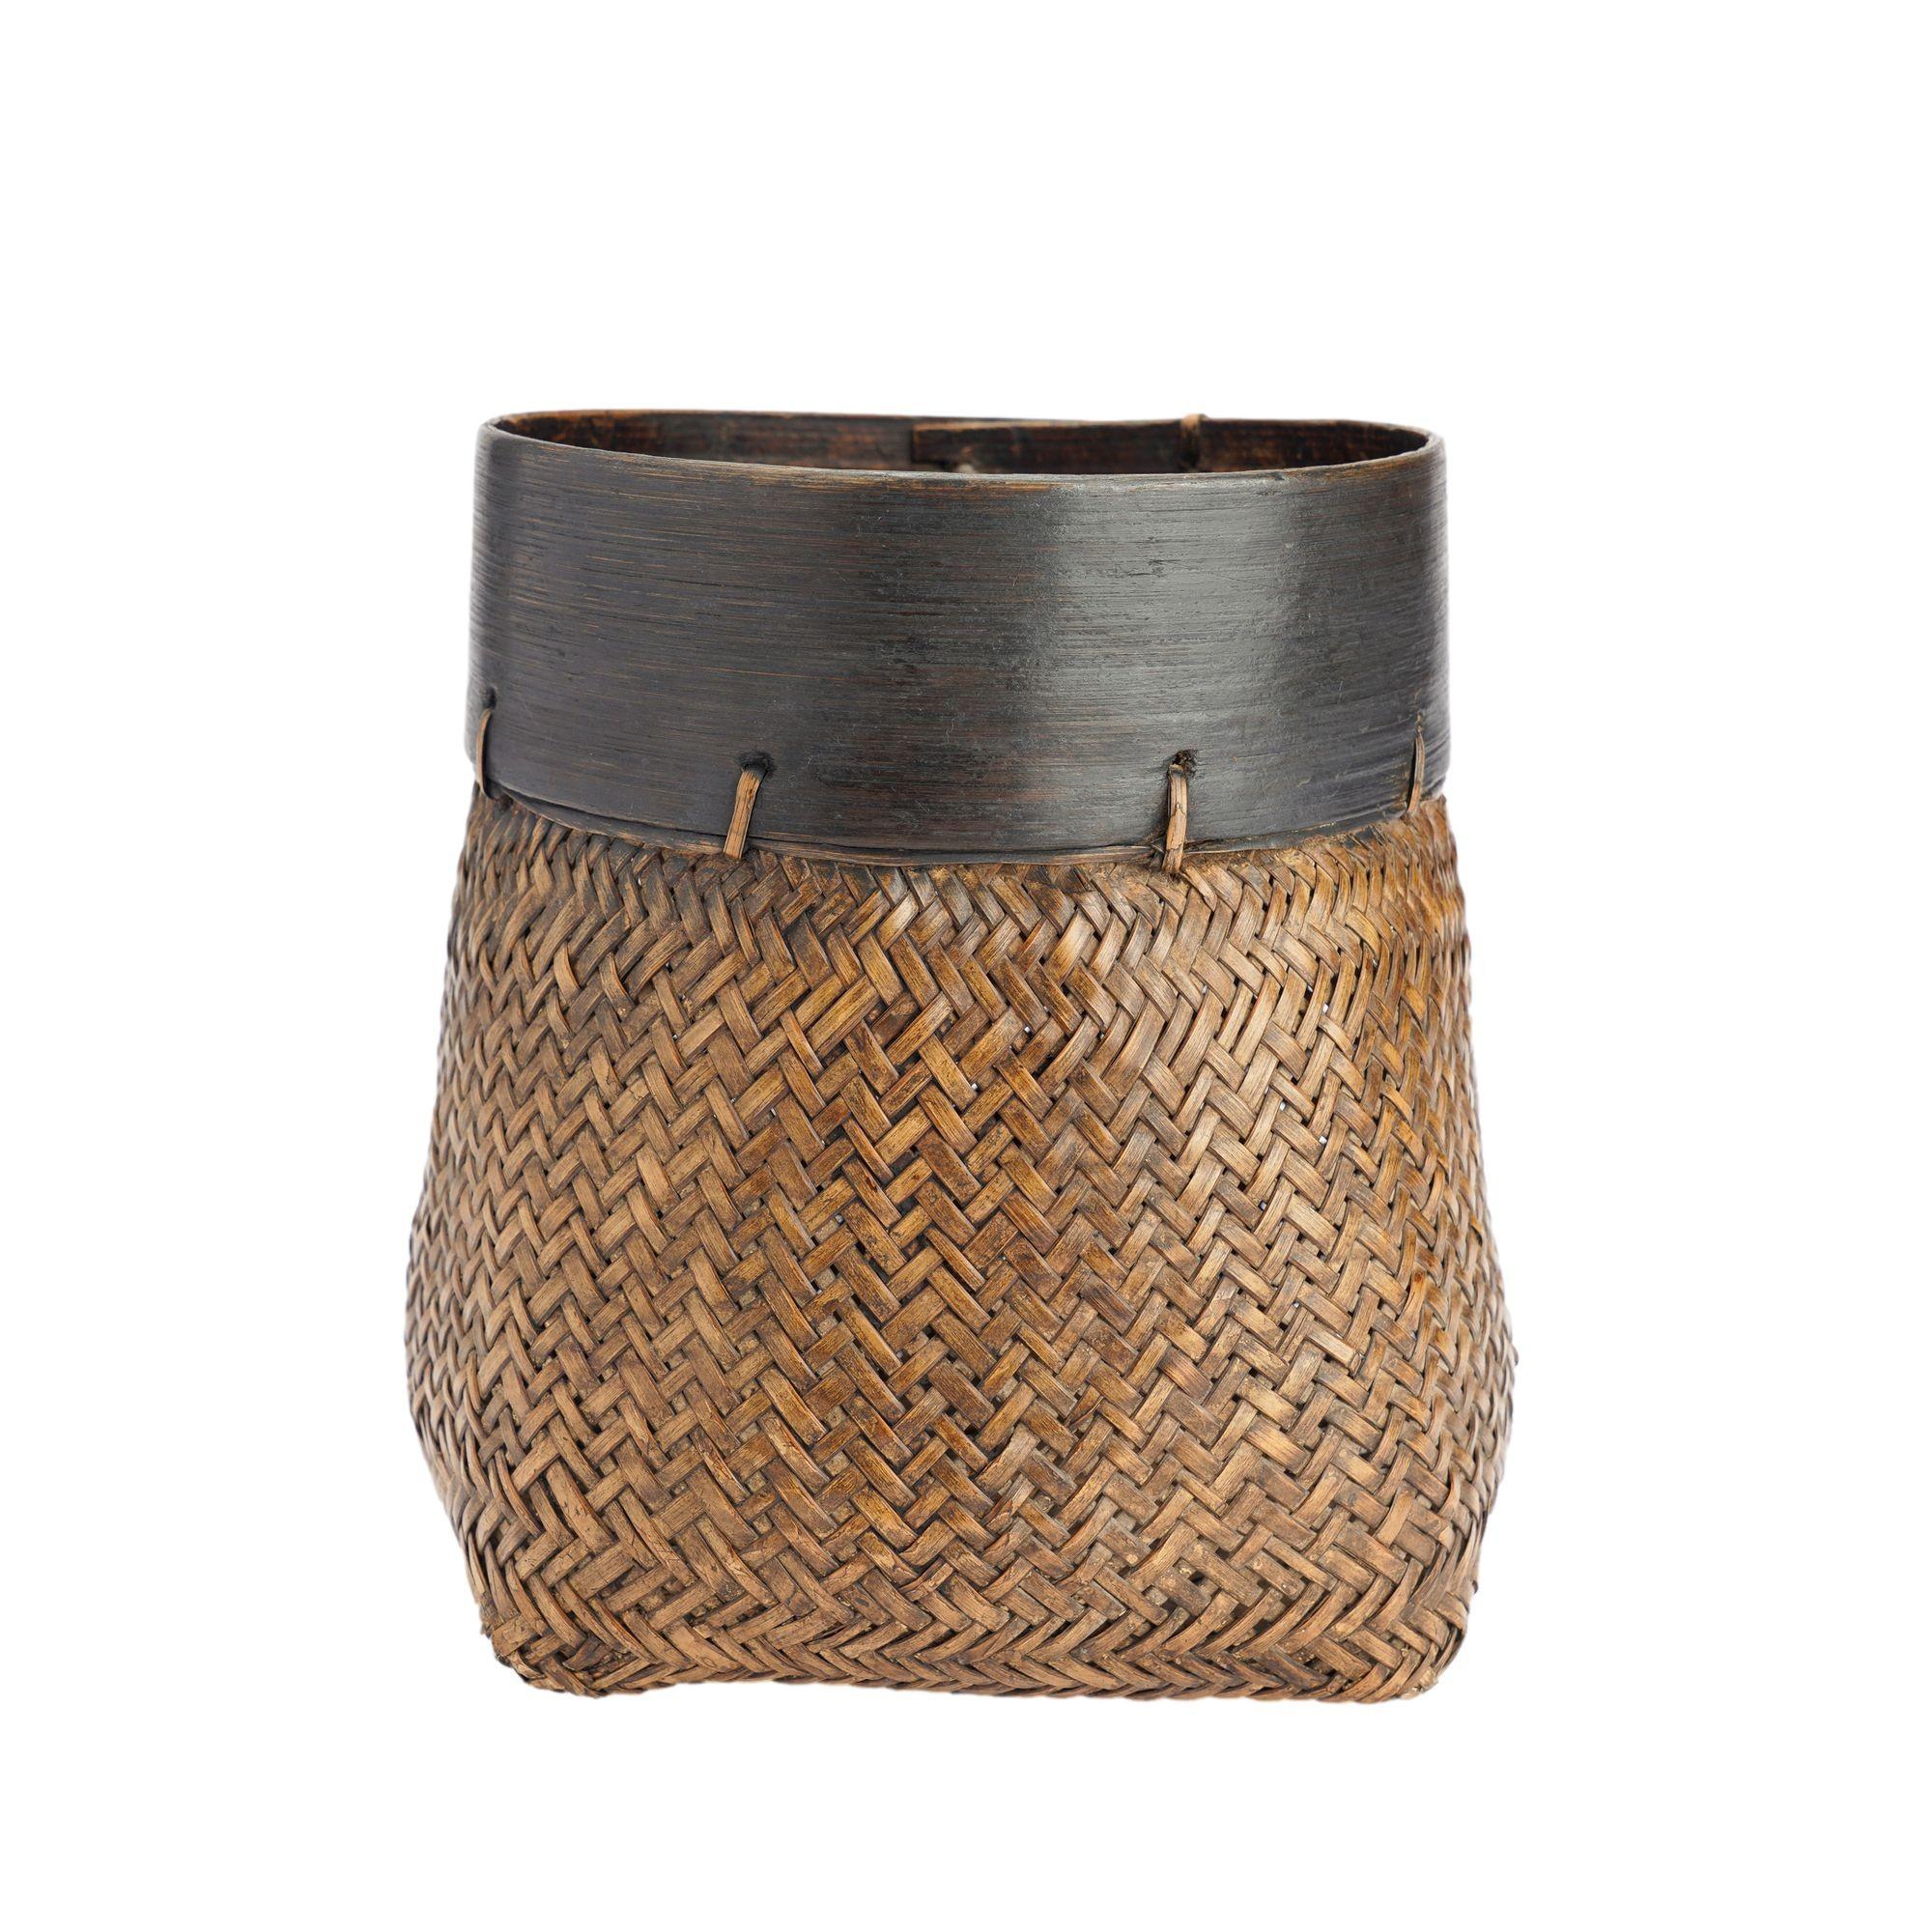 Traditional Chinese rice basket of woven bamboo with a 2-1/2